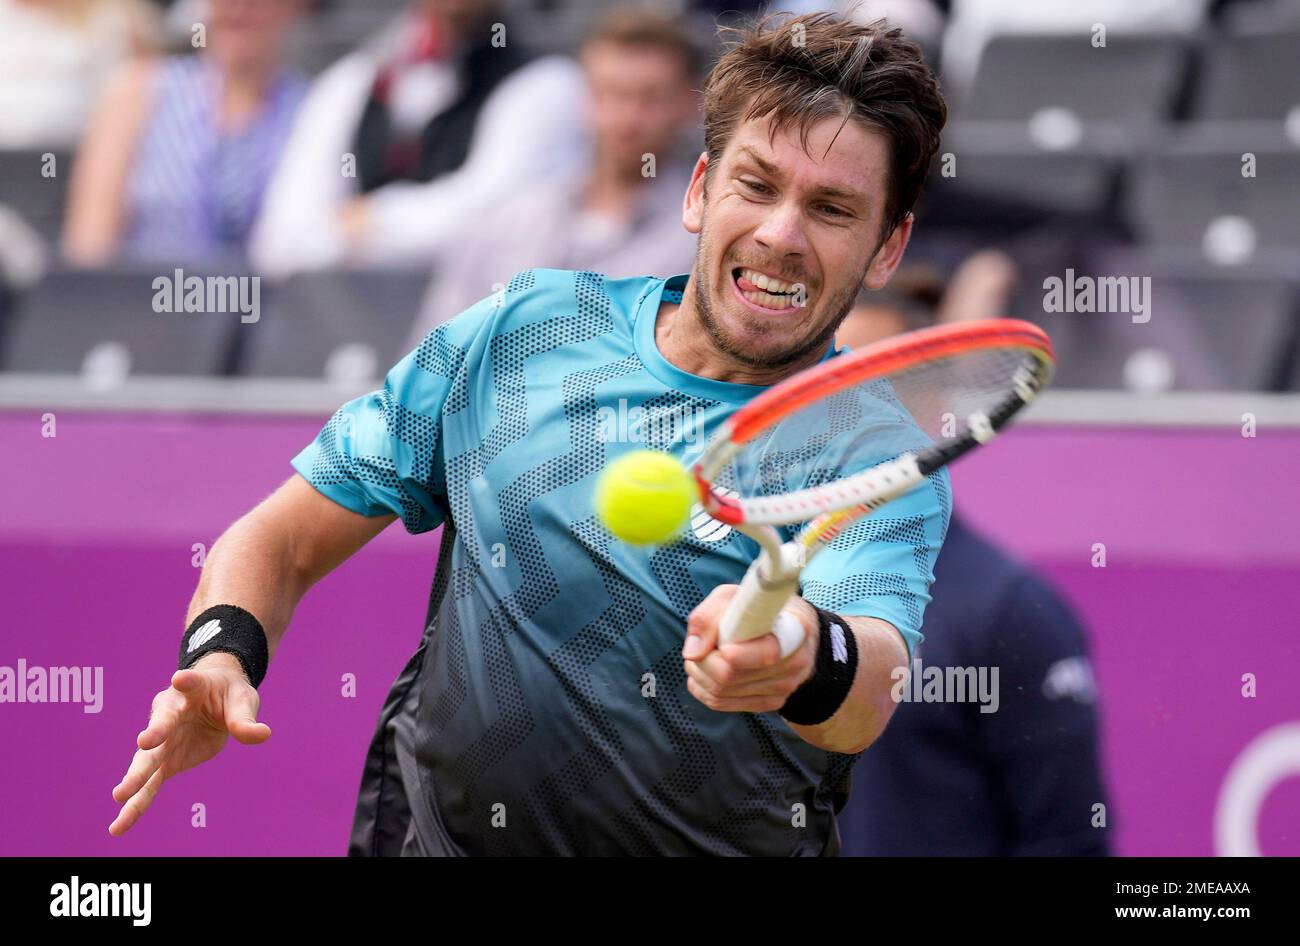 Cameron Norrie of Britain returns to Matteo Berrettini of Italy during their final singles tennis match at the Queens Club tournament in London, Sunday, June 20, 2021